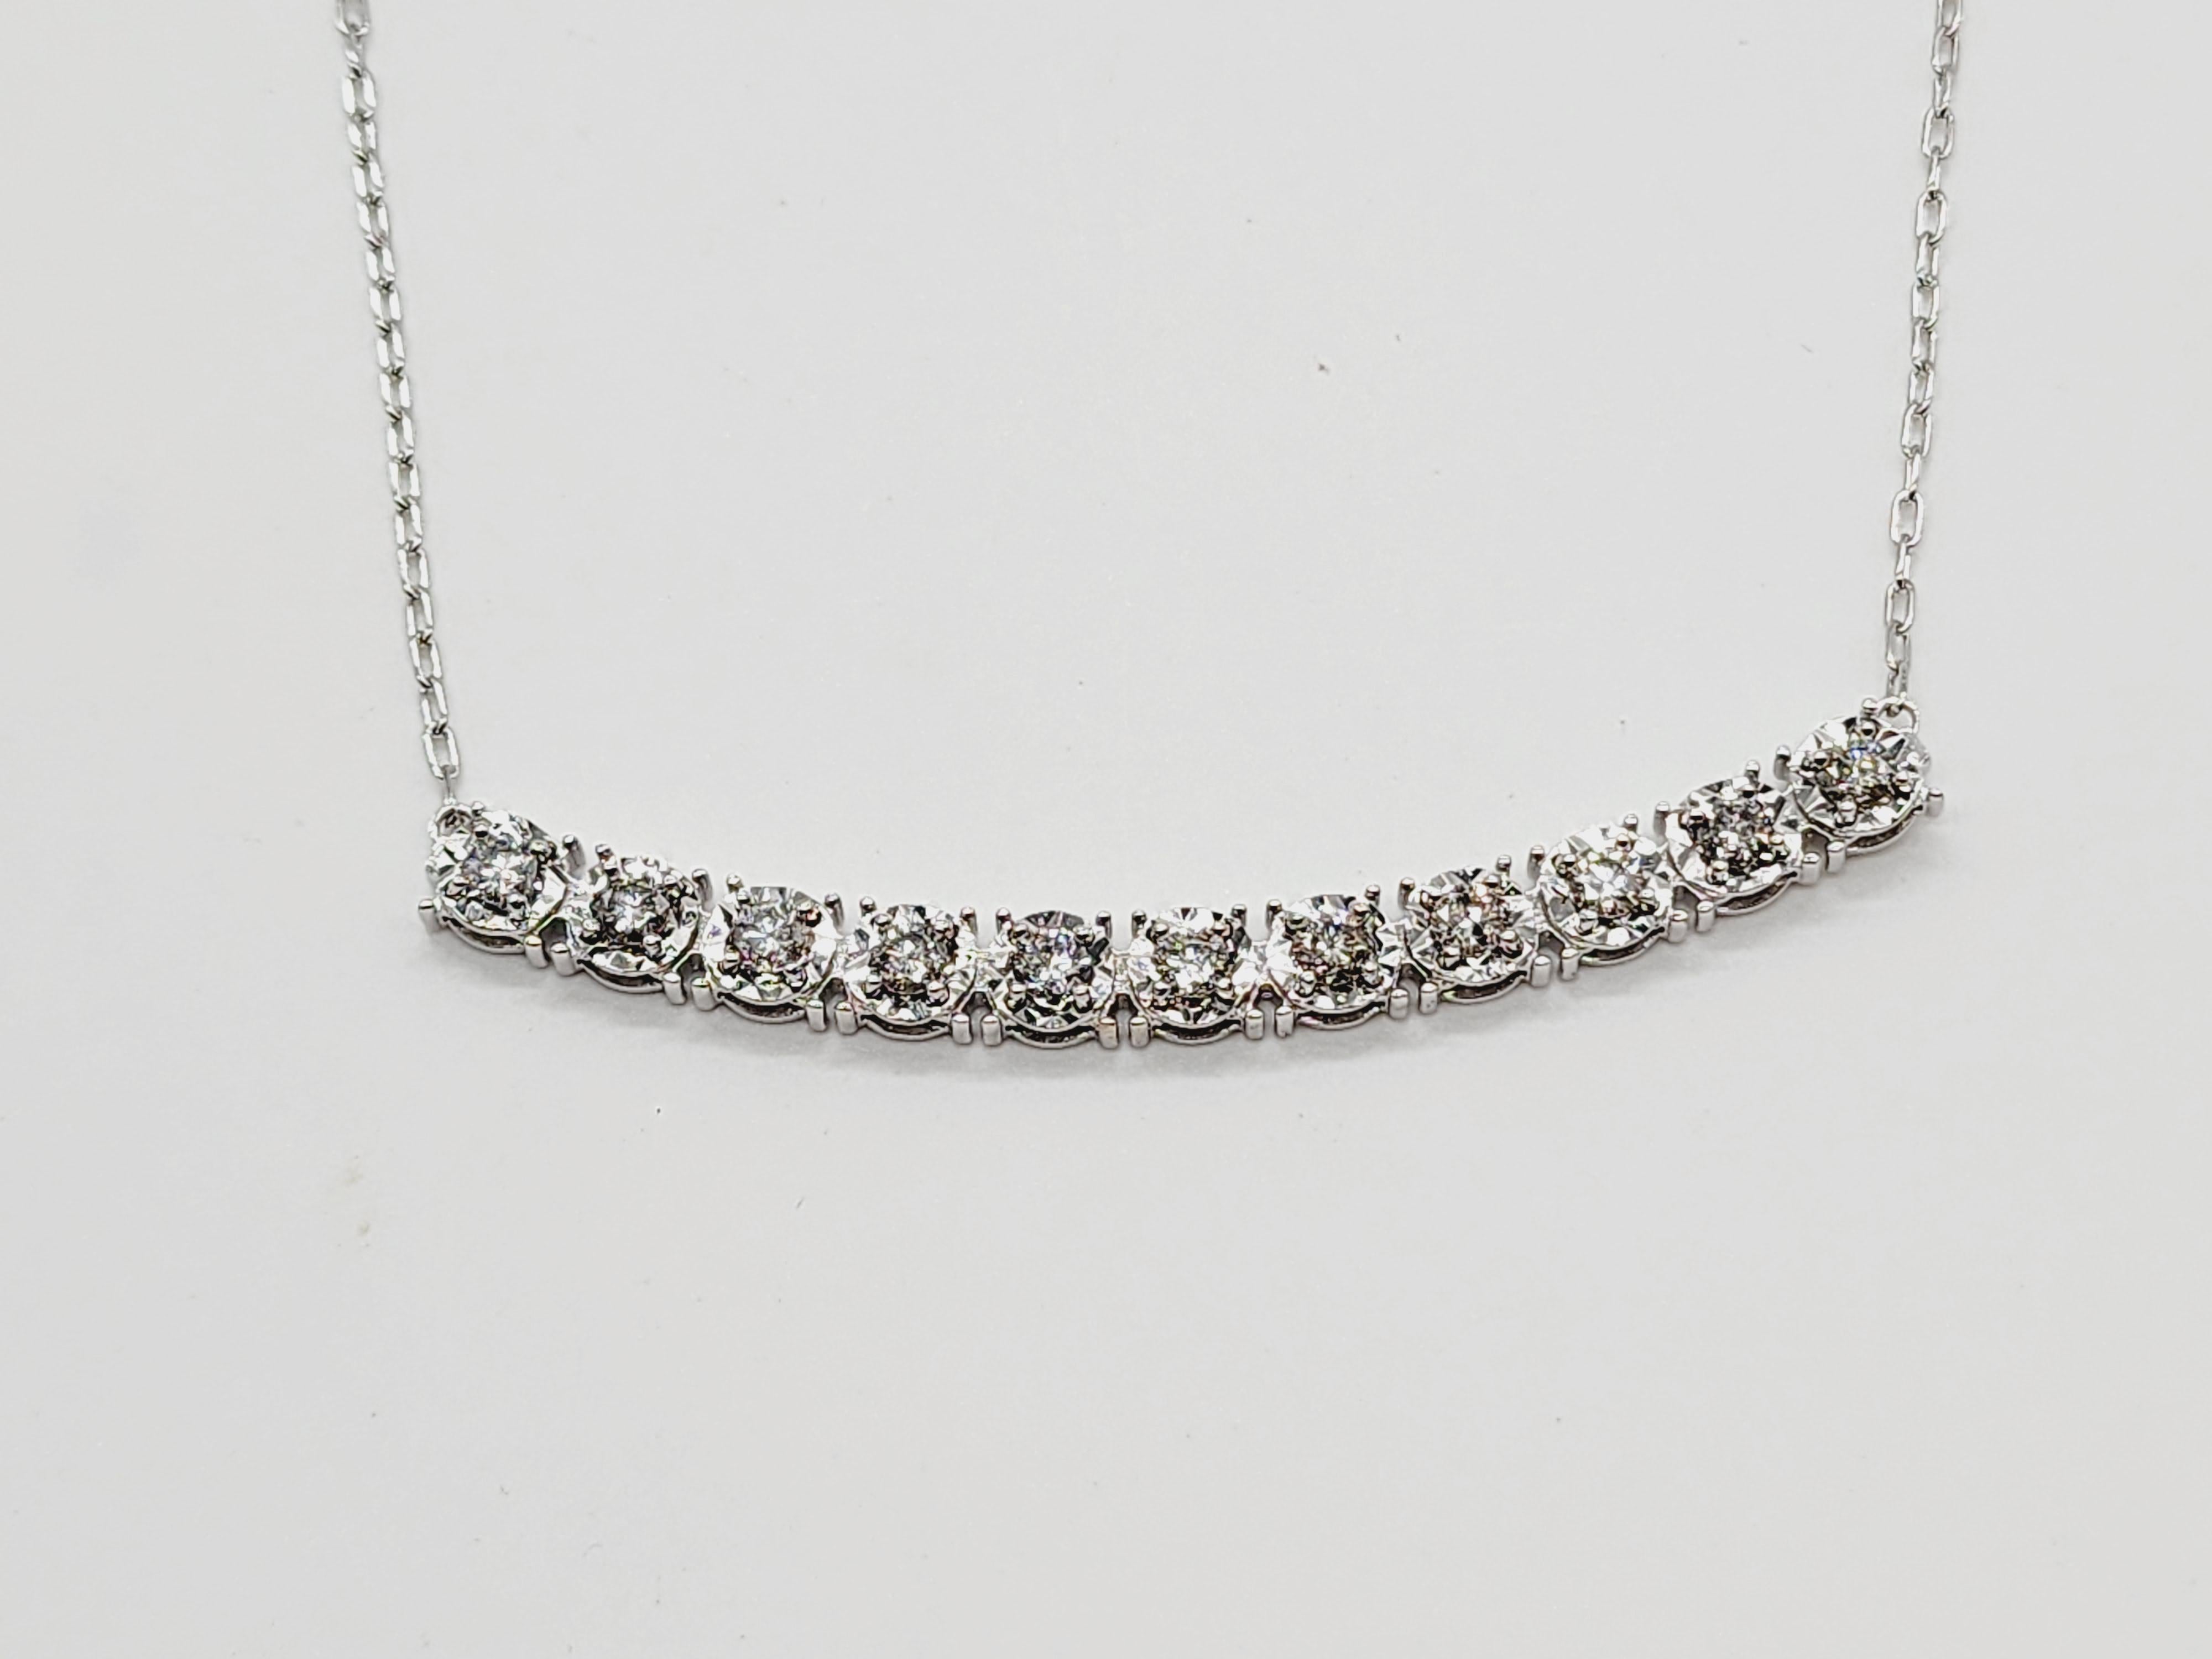 Brilliant and beautiful mini illusion setting necklace, natural round-brilliant cut white diamonds clean and Excellent shine. 14k White gold illusion setting four-prong for maximum light brilliance.
18 inch length. Average I Color, SI Clarity.